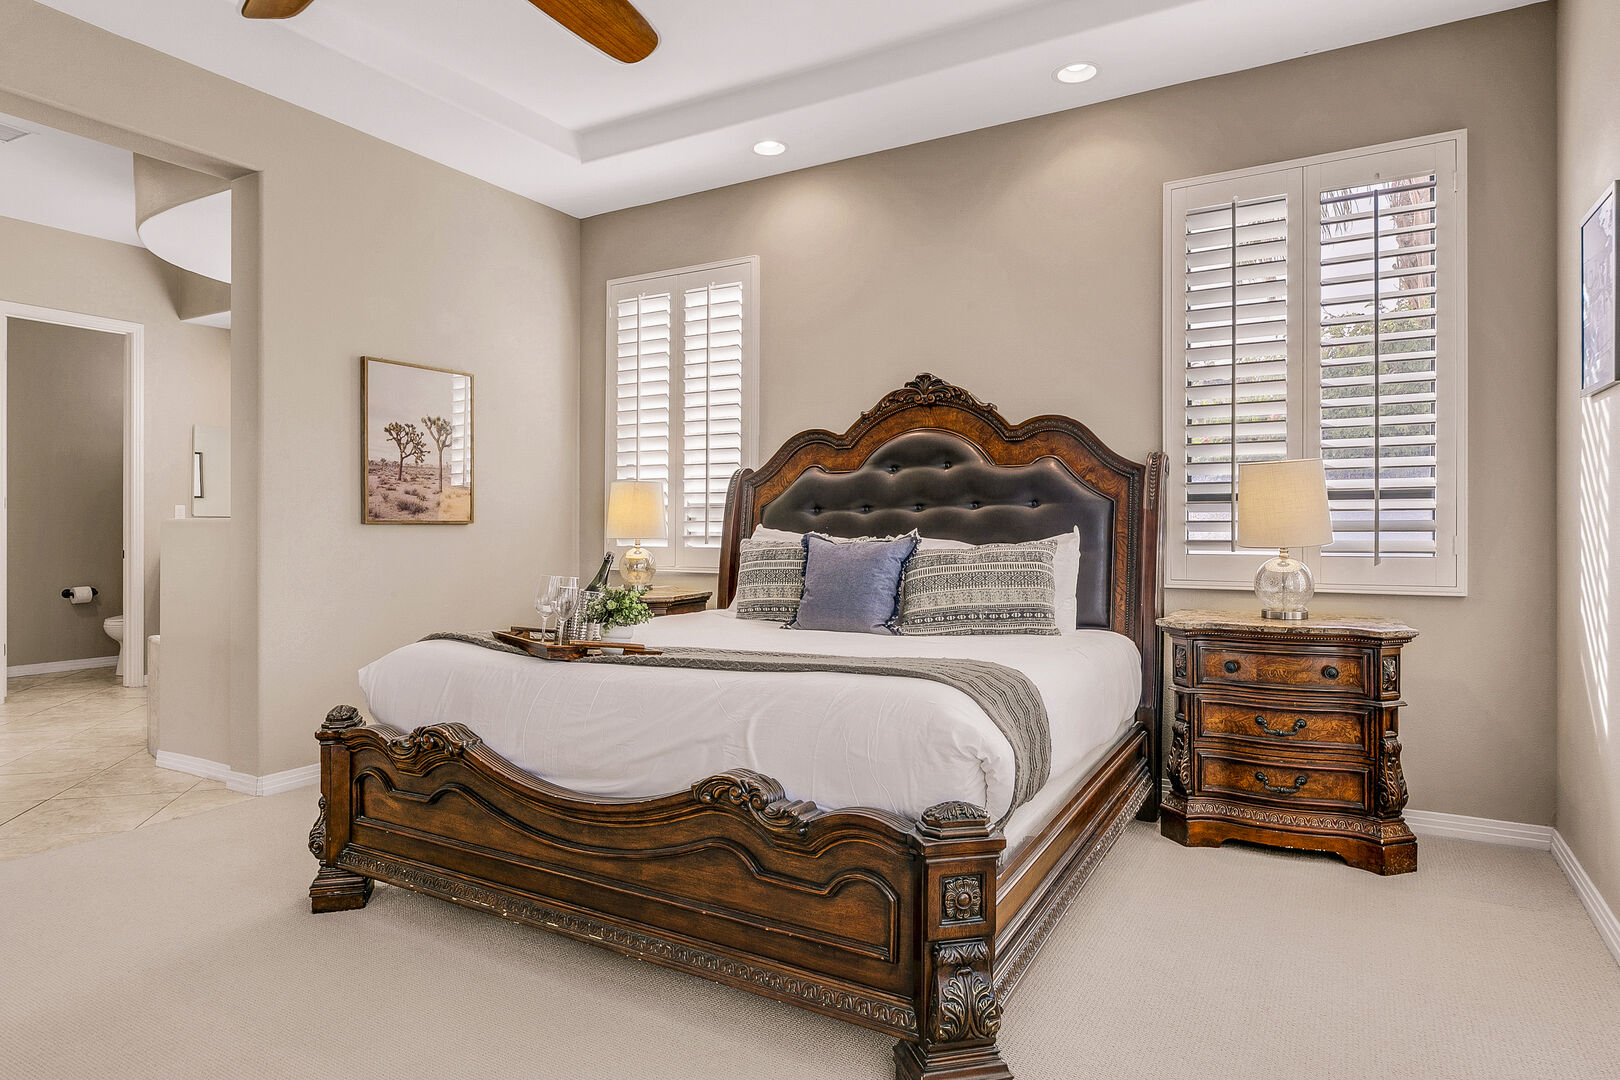 Master Suite 1 is located to the left of entrance doors and features a King-sized Bed.